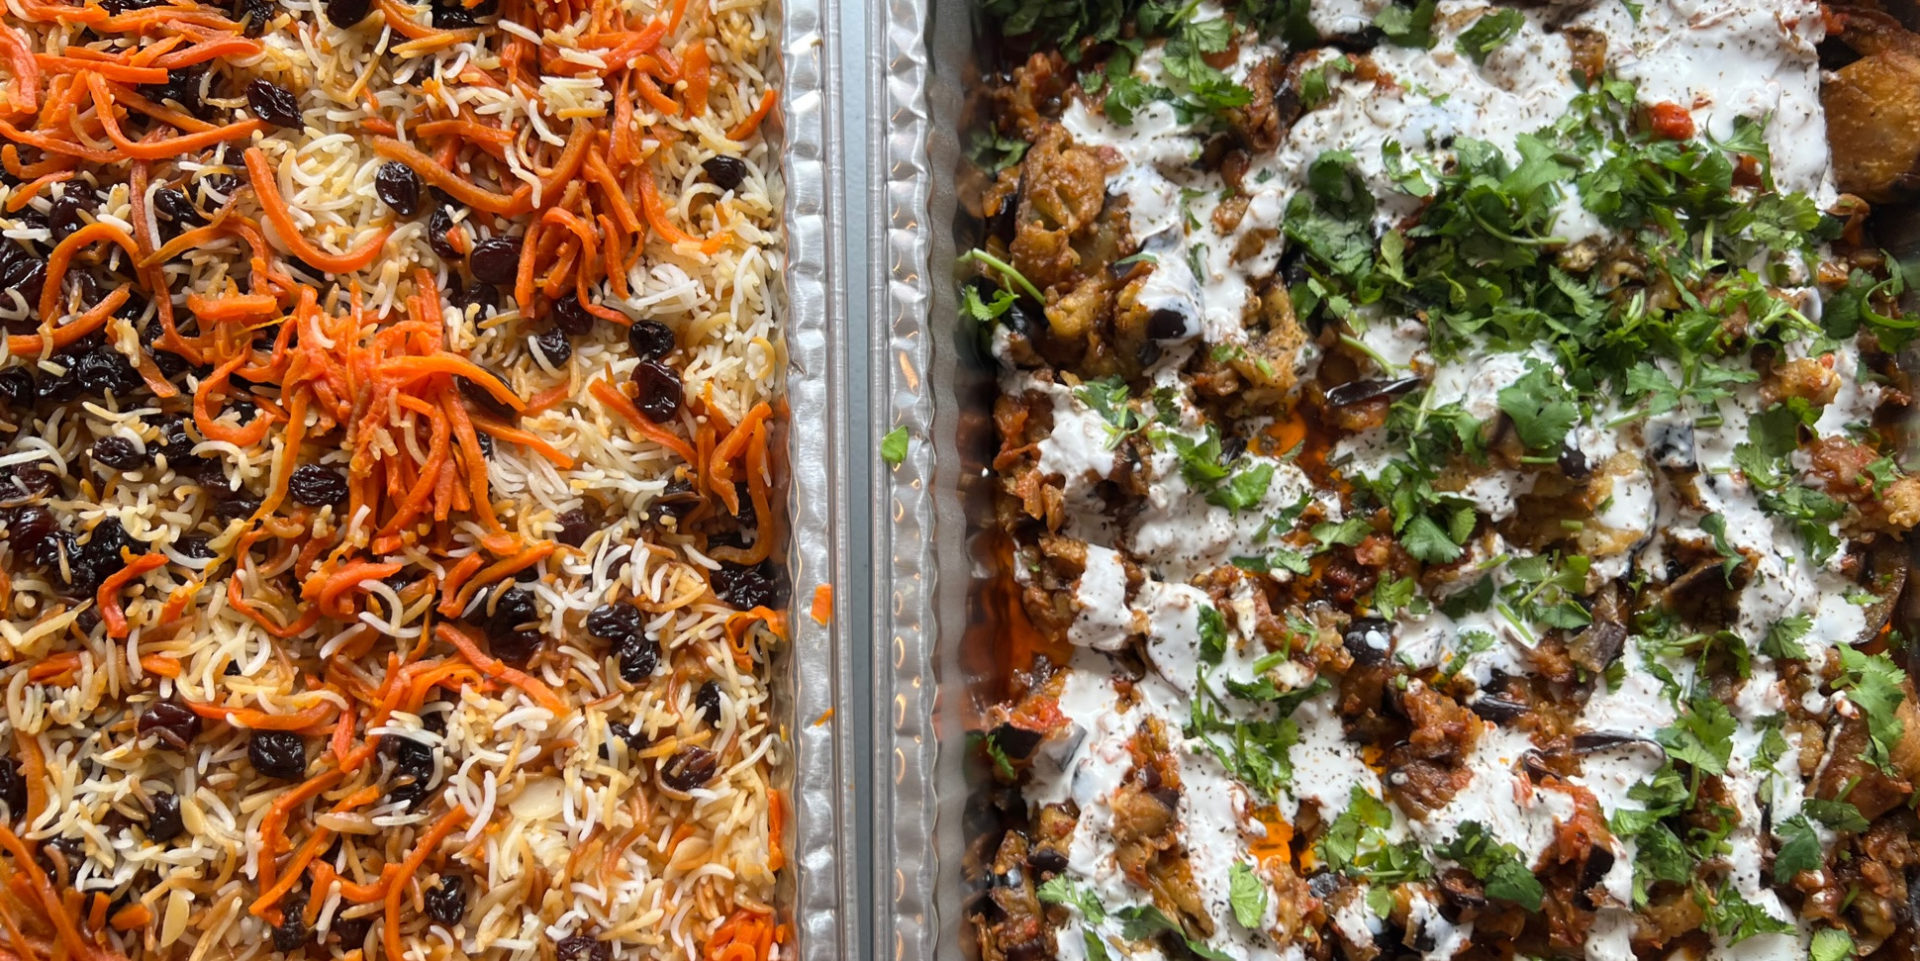 A cropped photo of the catering by Afghan Cuisine restaurant in Champaign-Urbana, Illinois. Photo by Alyssa Buckley.